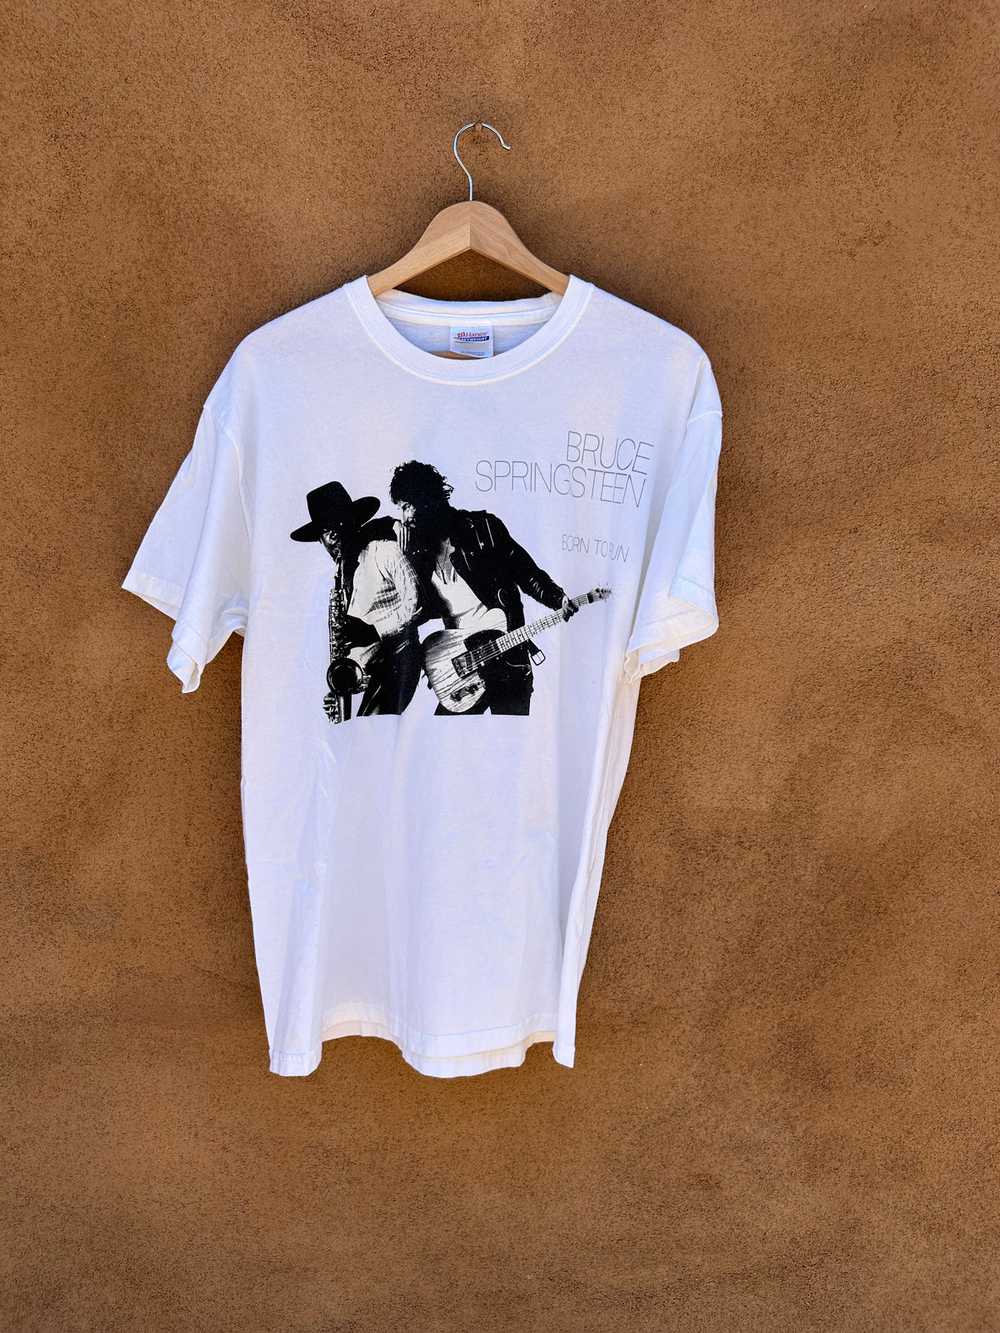 Bruce Springsteen Born to Run 1999 Re-issue Tee - image 1